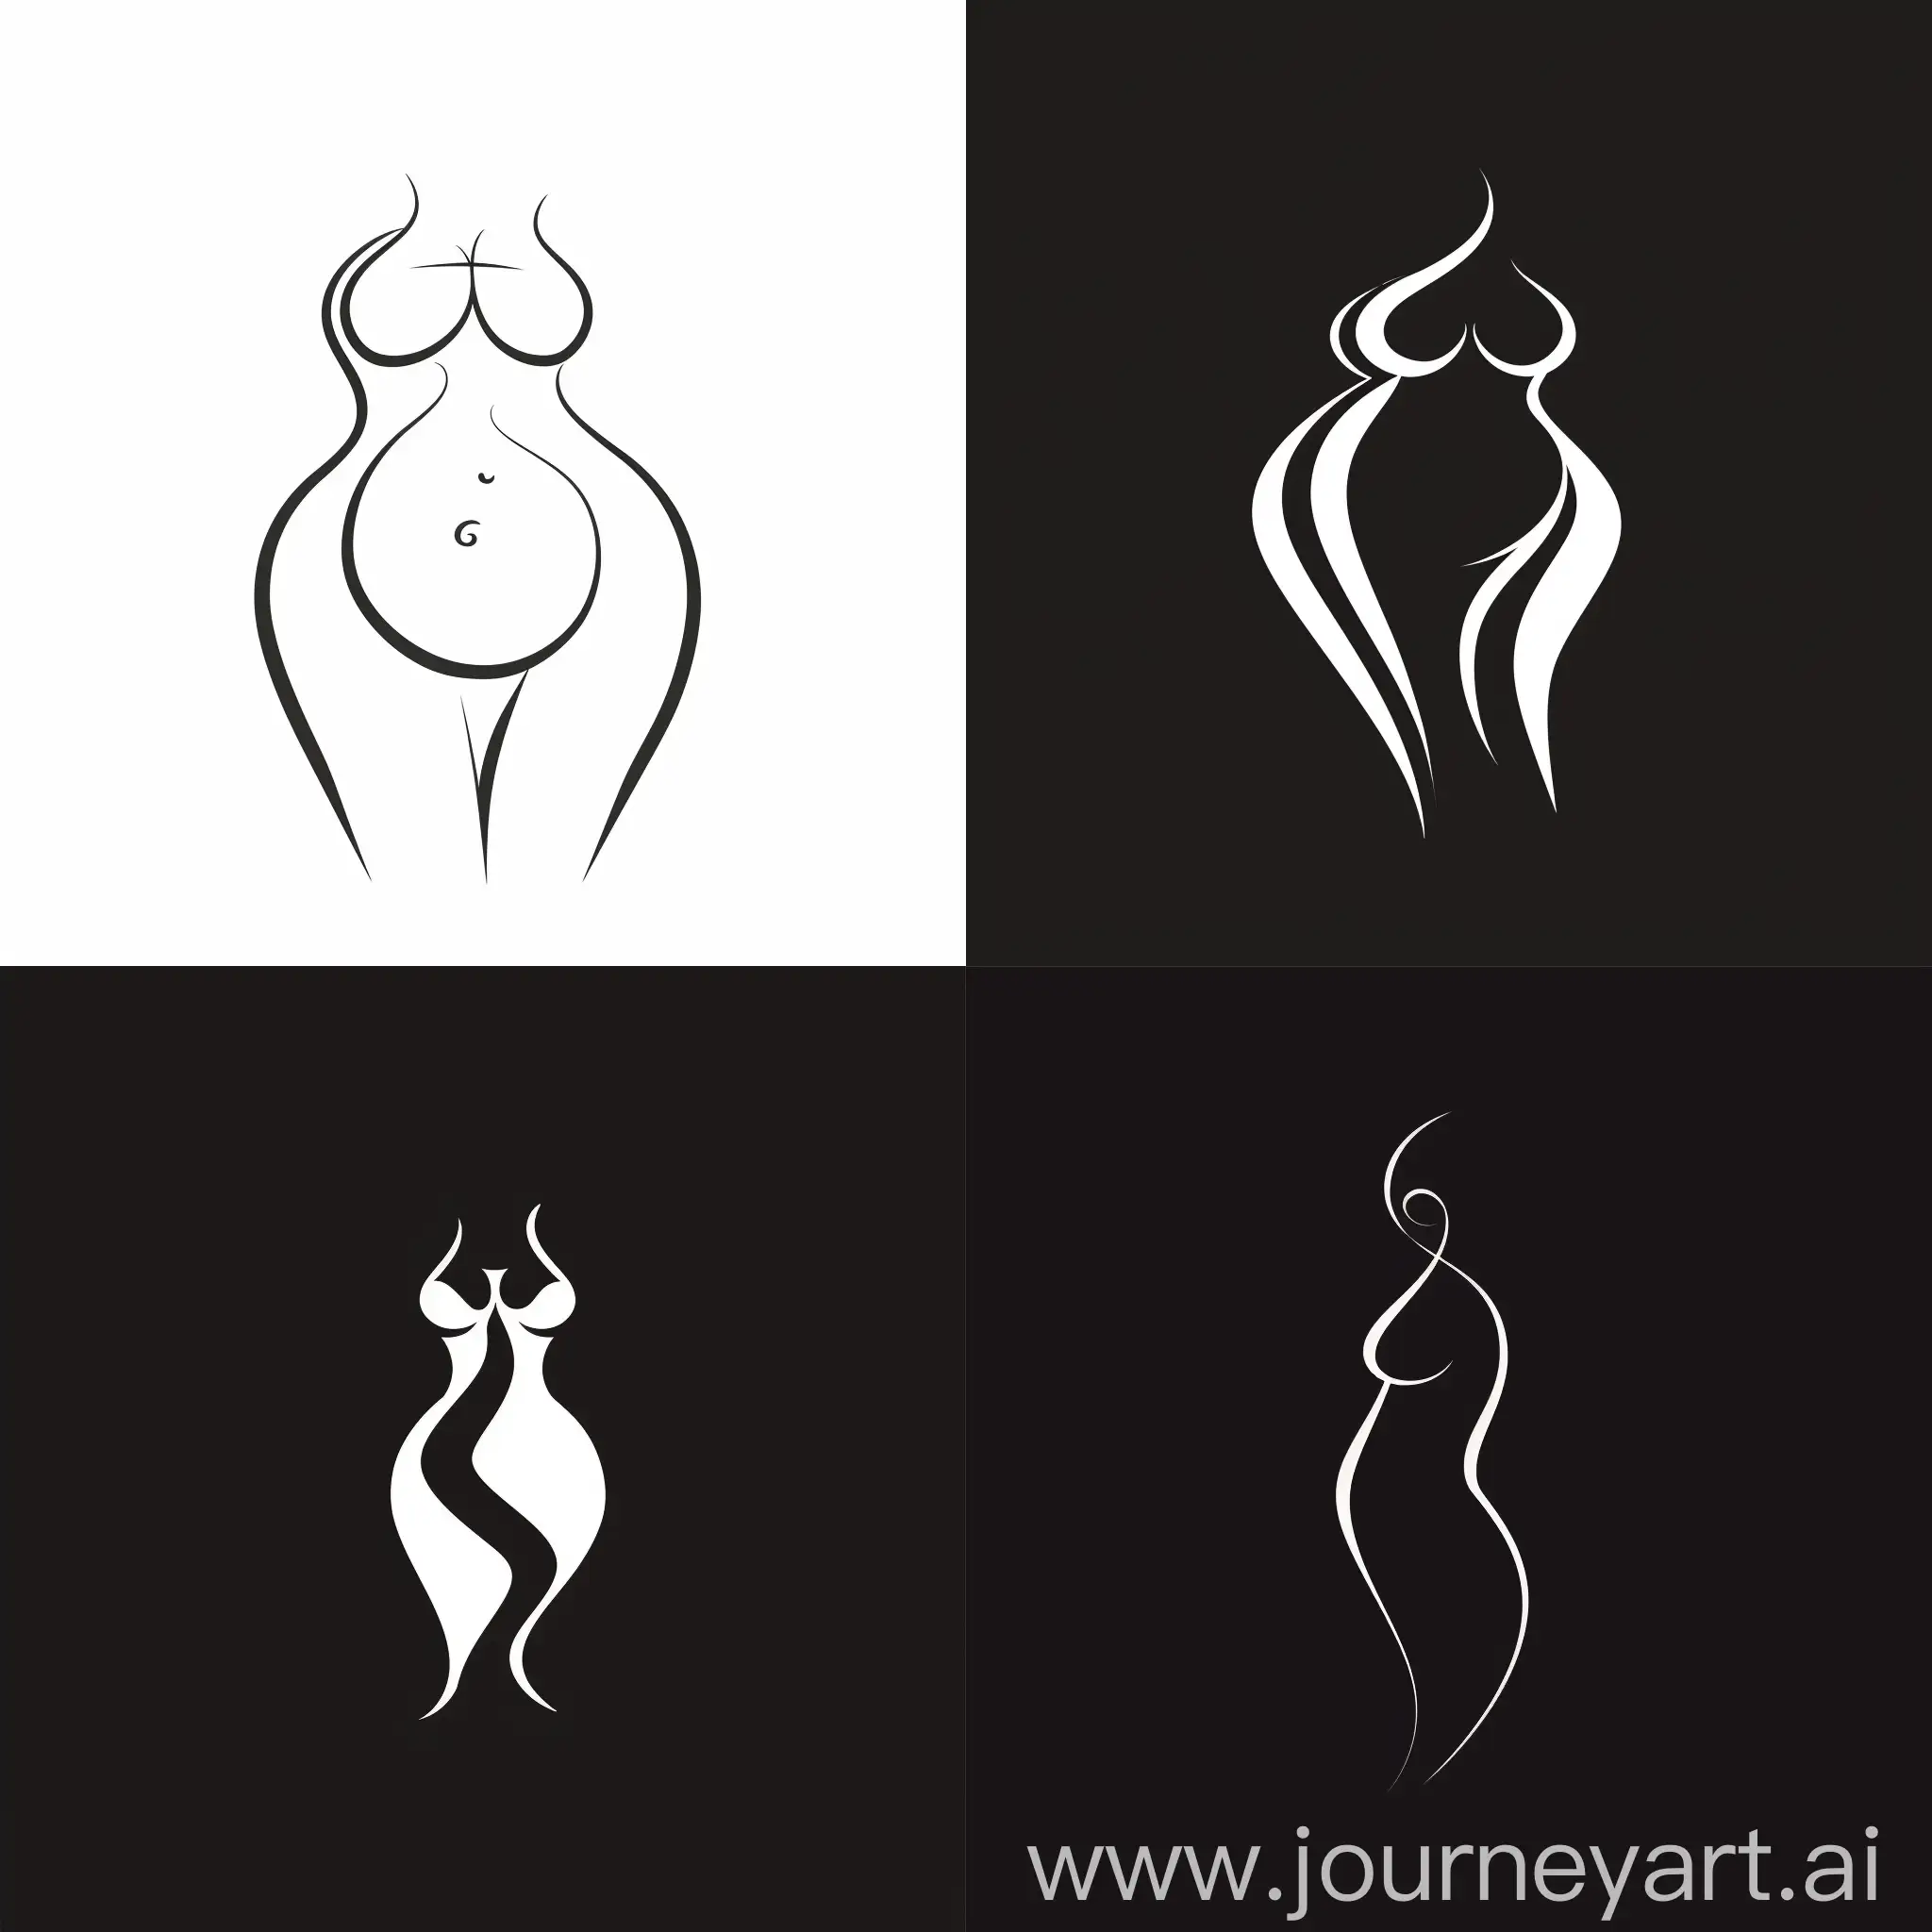 Design a logo for women's clothing for overweight people, take the curvy body line as the basis for the logo. The brand name is a big line. Display the brand name in the logo.